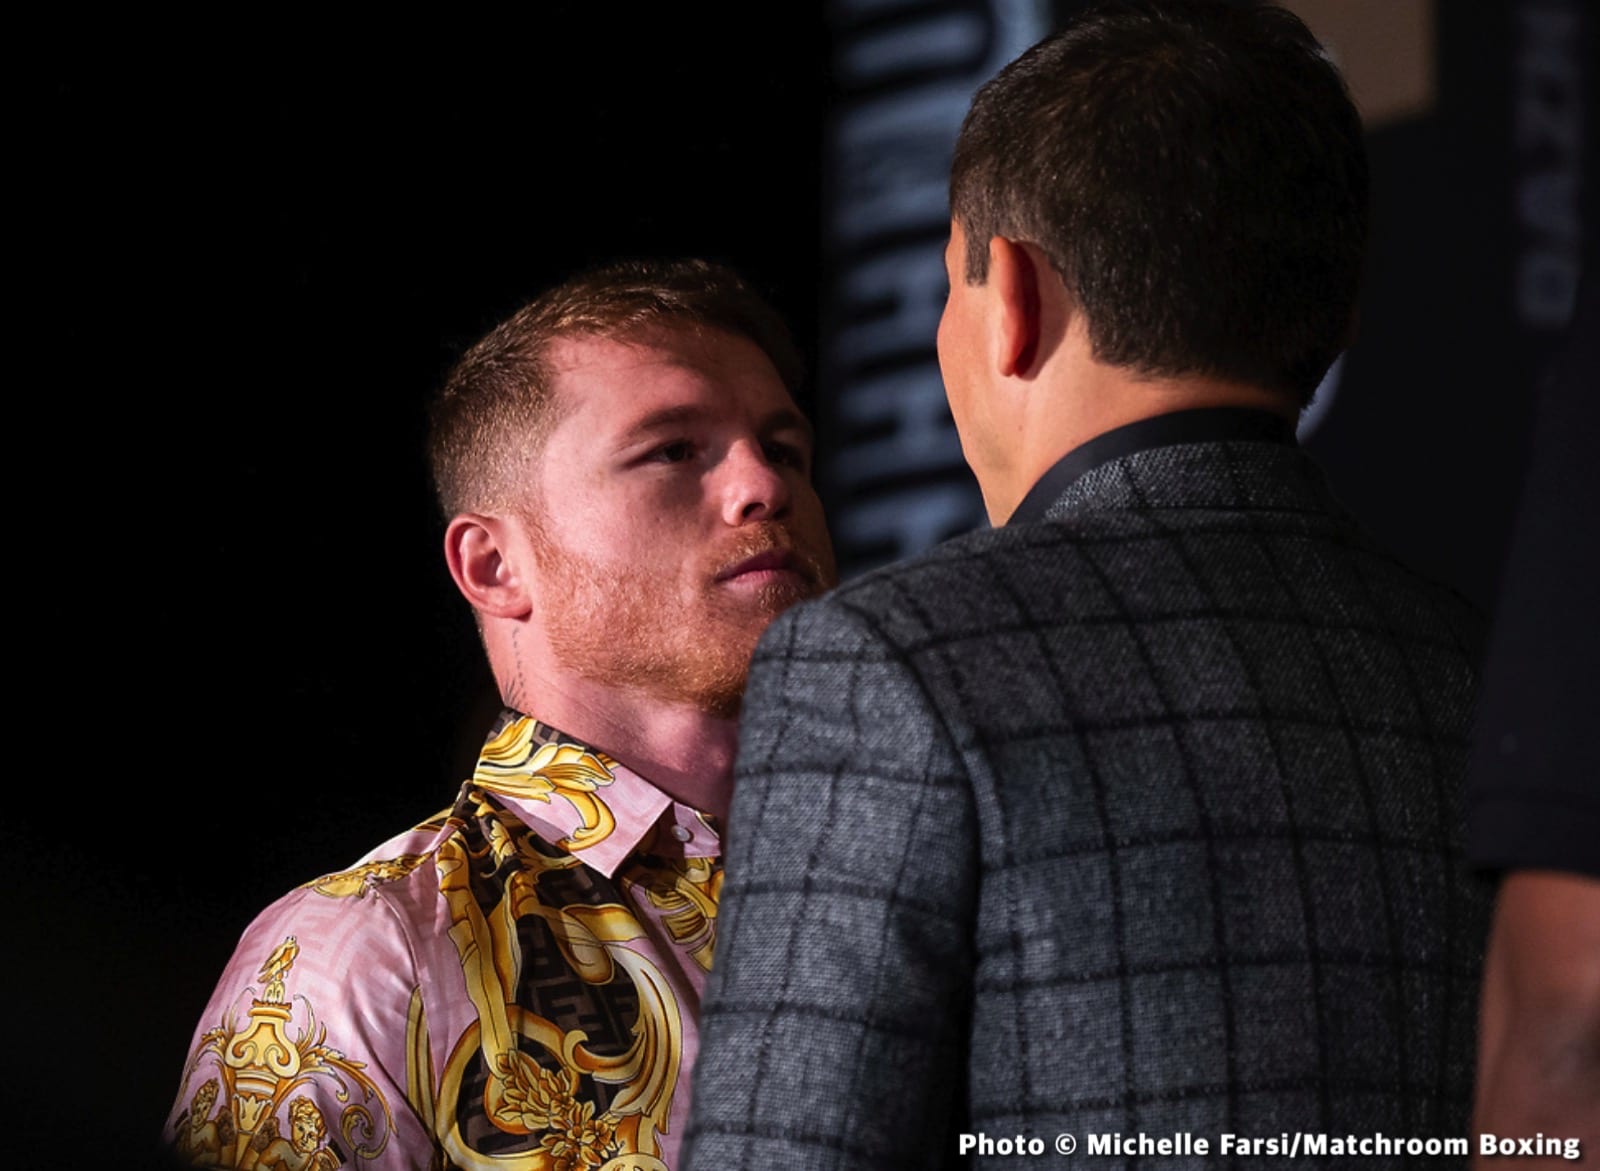 Image: Eddie Hearn wants Golovkin to confront Canelo about his distain for him